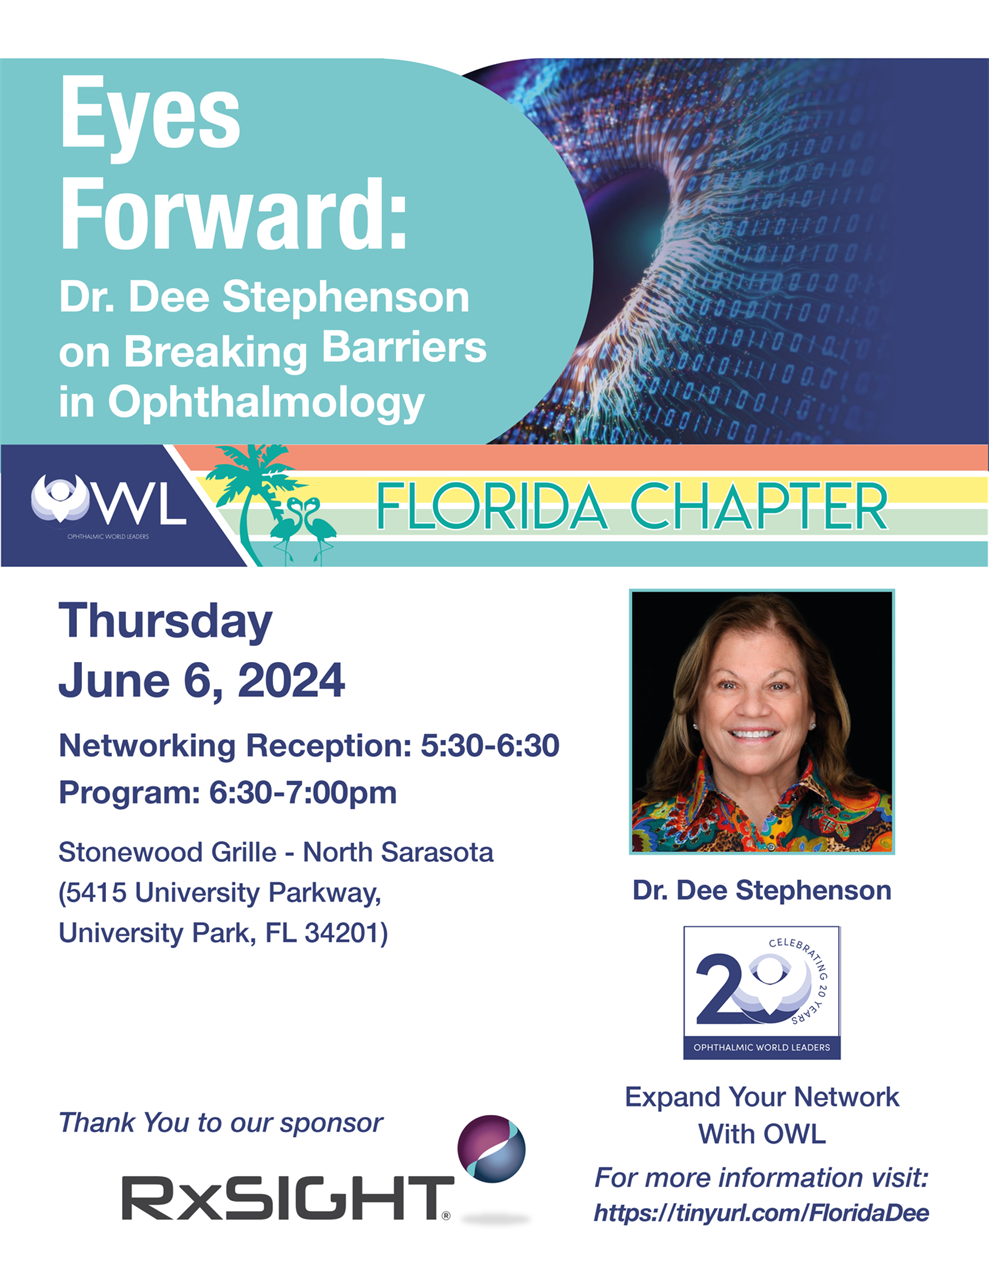 Eyes Forward: Dr. Dee Stephenson on Breaking Barriers in Ophthalmology (OWL FL Chapter Event) | Date: Thursday, June 6, 2024; Networking Reception: 5:30-6:30 PM; Program: 6:30-7 PM. Location: Stonewood Grille - North Sarasota. Thank you to our sponsor, RxSight. Expand your network with OWL, register today to attend!